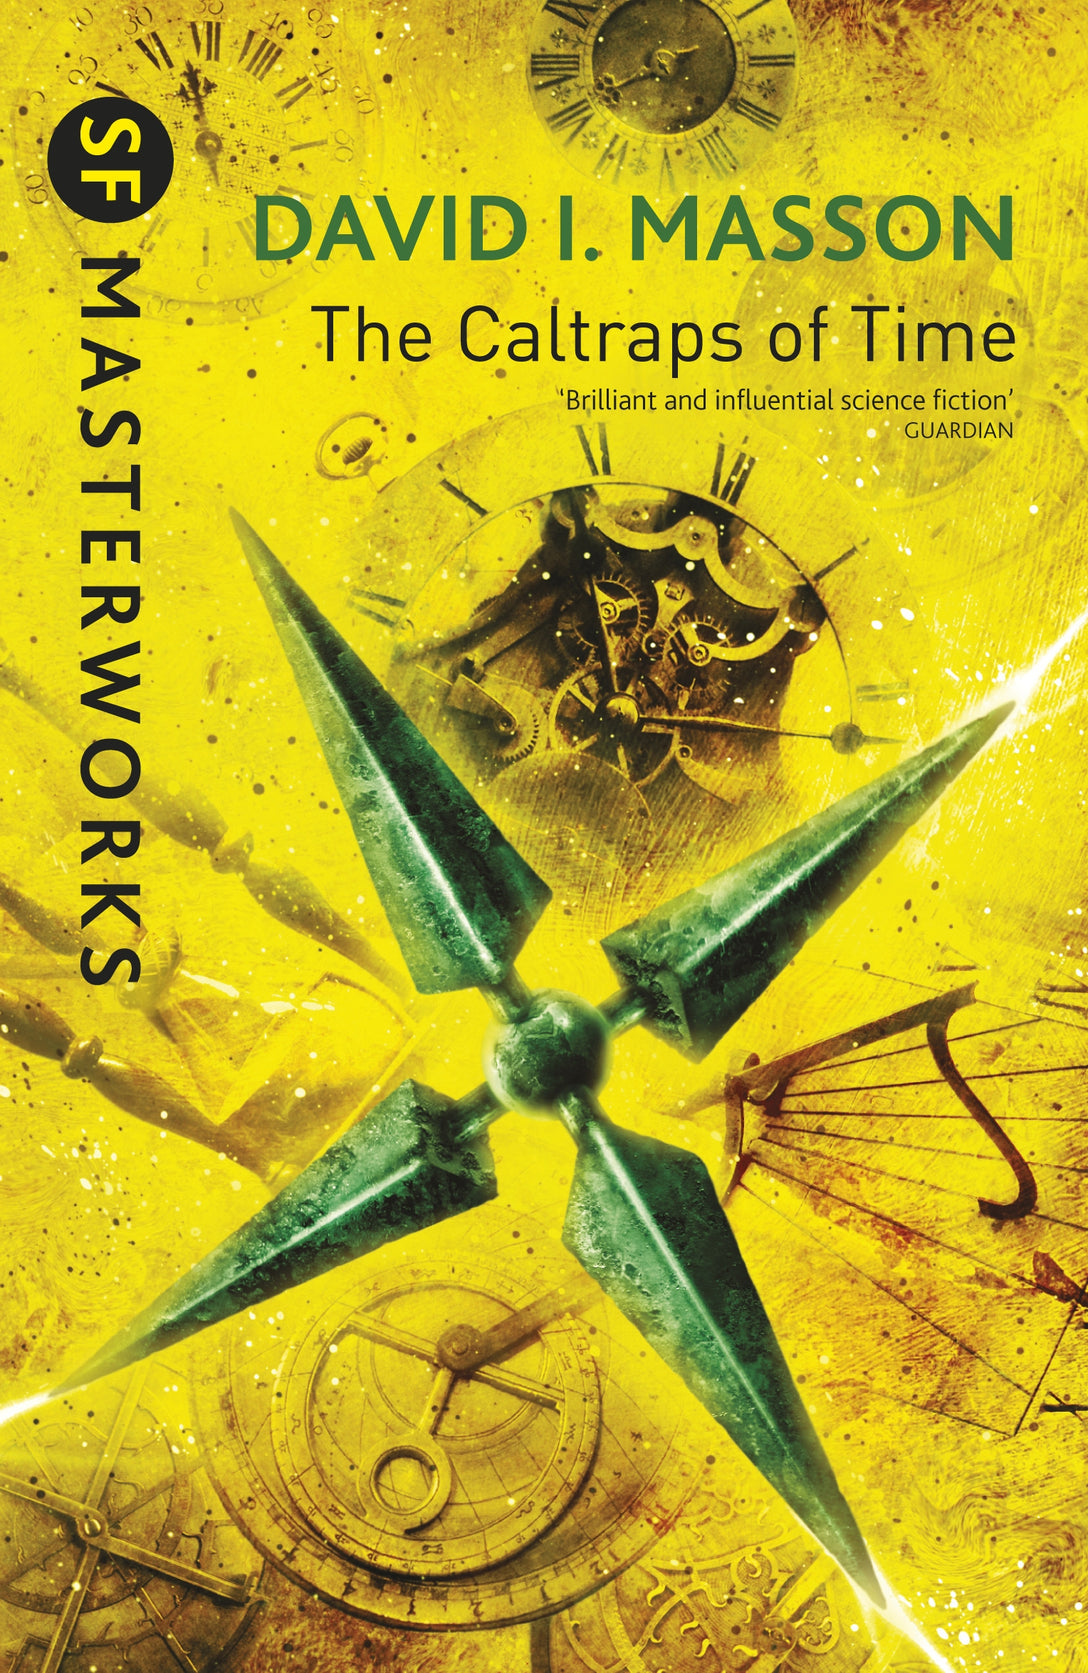 The Caltraps of Time by David I. Masson